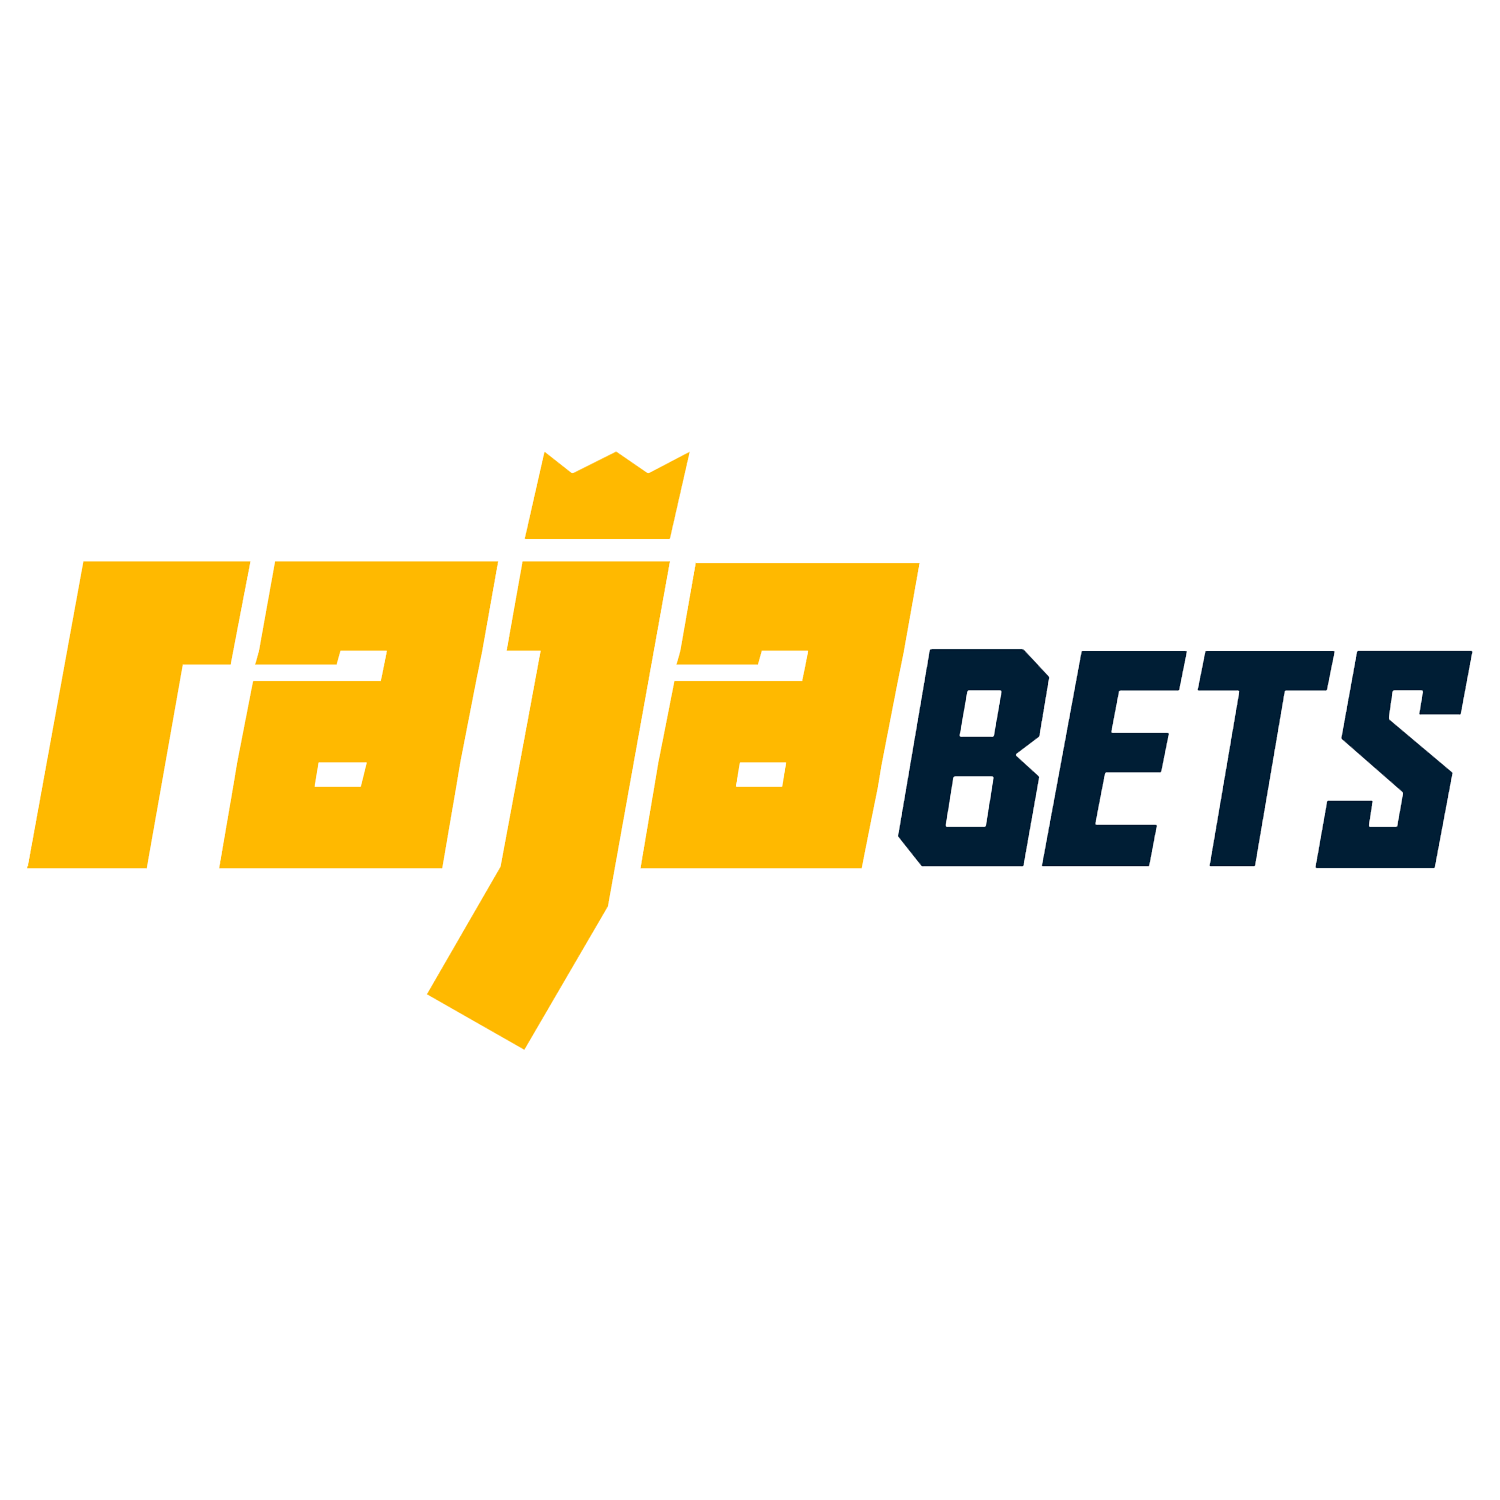 Rajabets is one of the most reliable cricket betting sites.